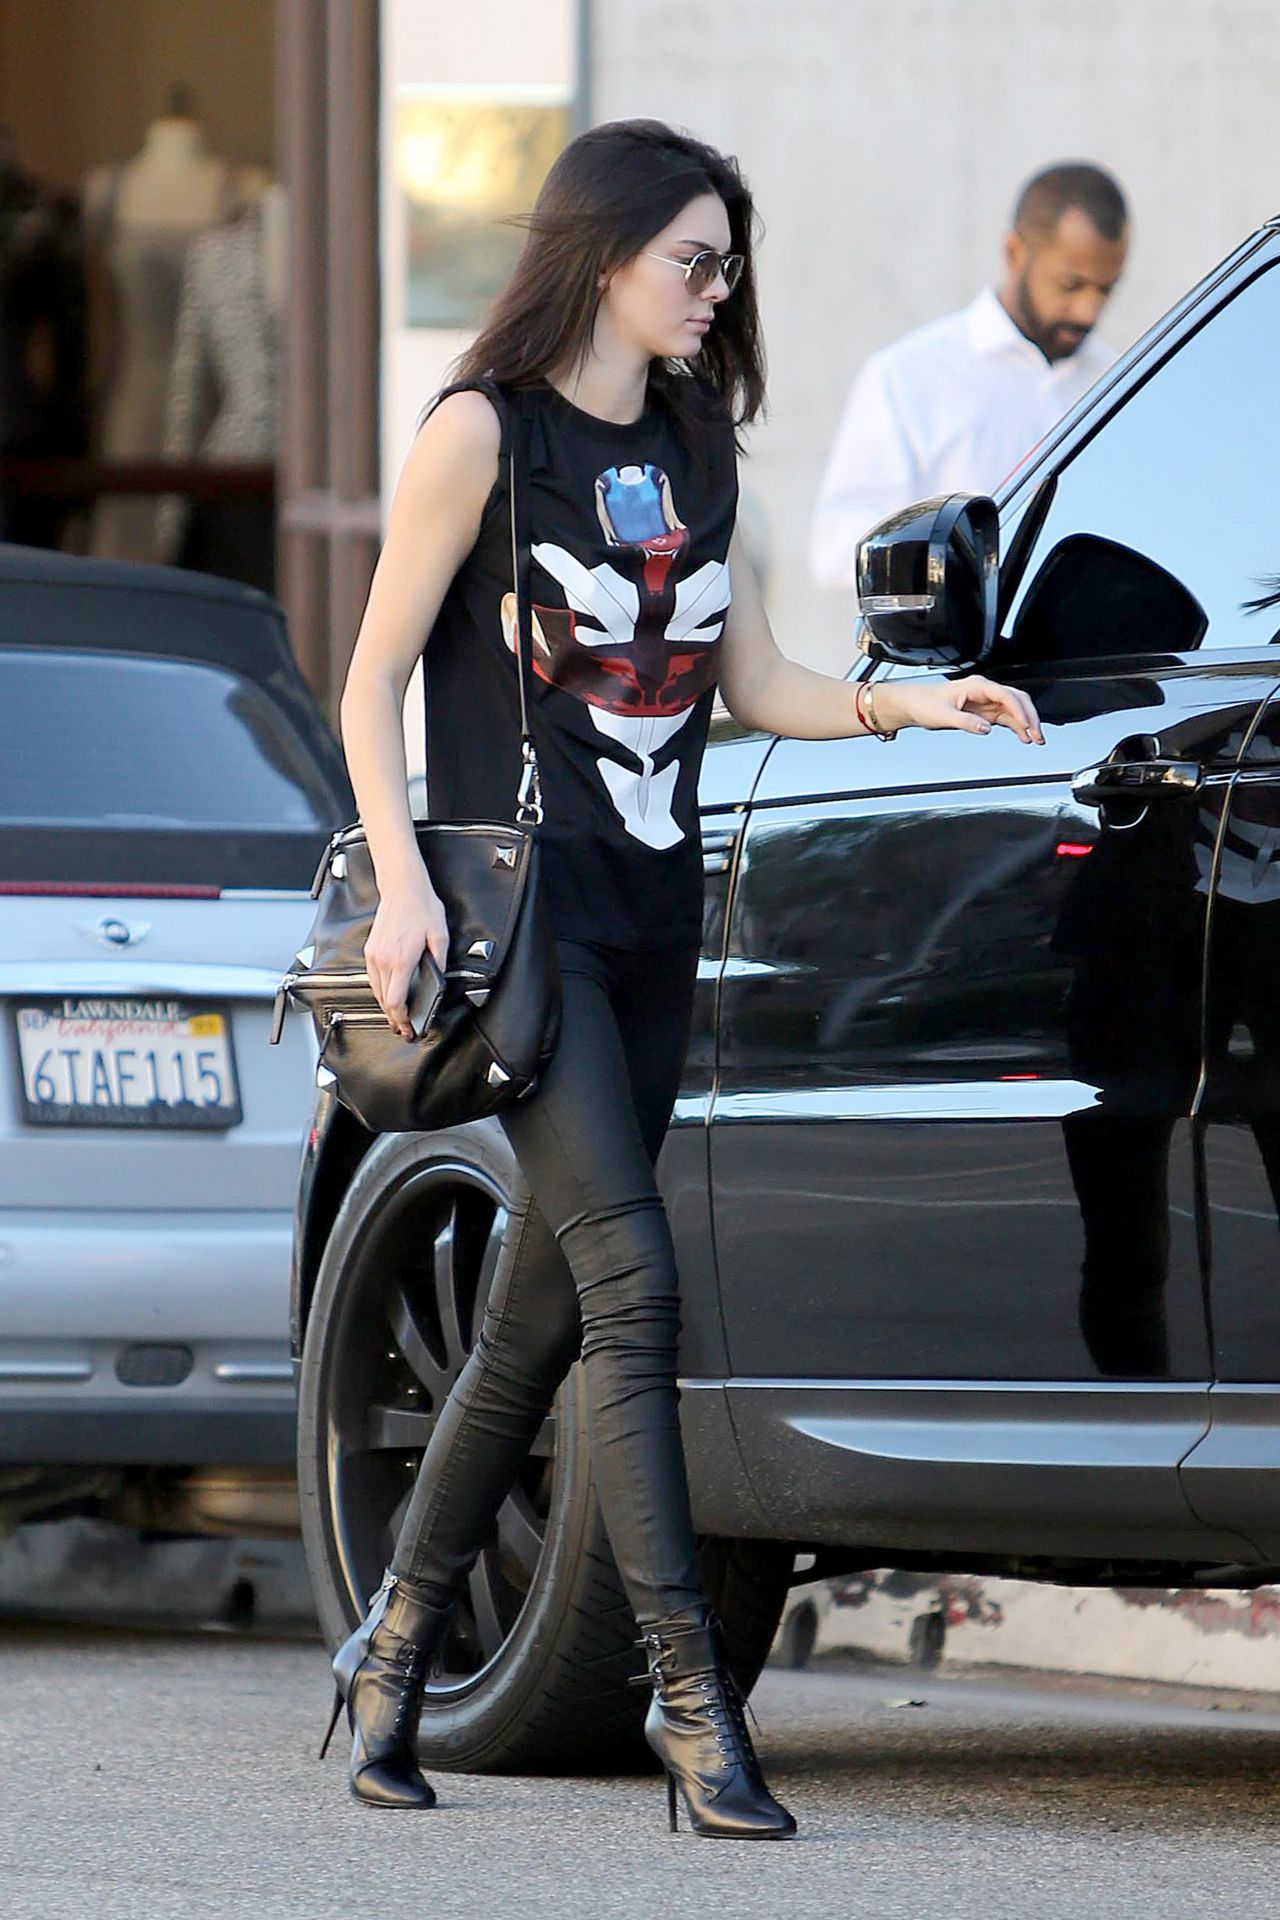 Kendall Jenner Calabasas July 23, 2015 – Star Style